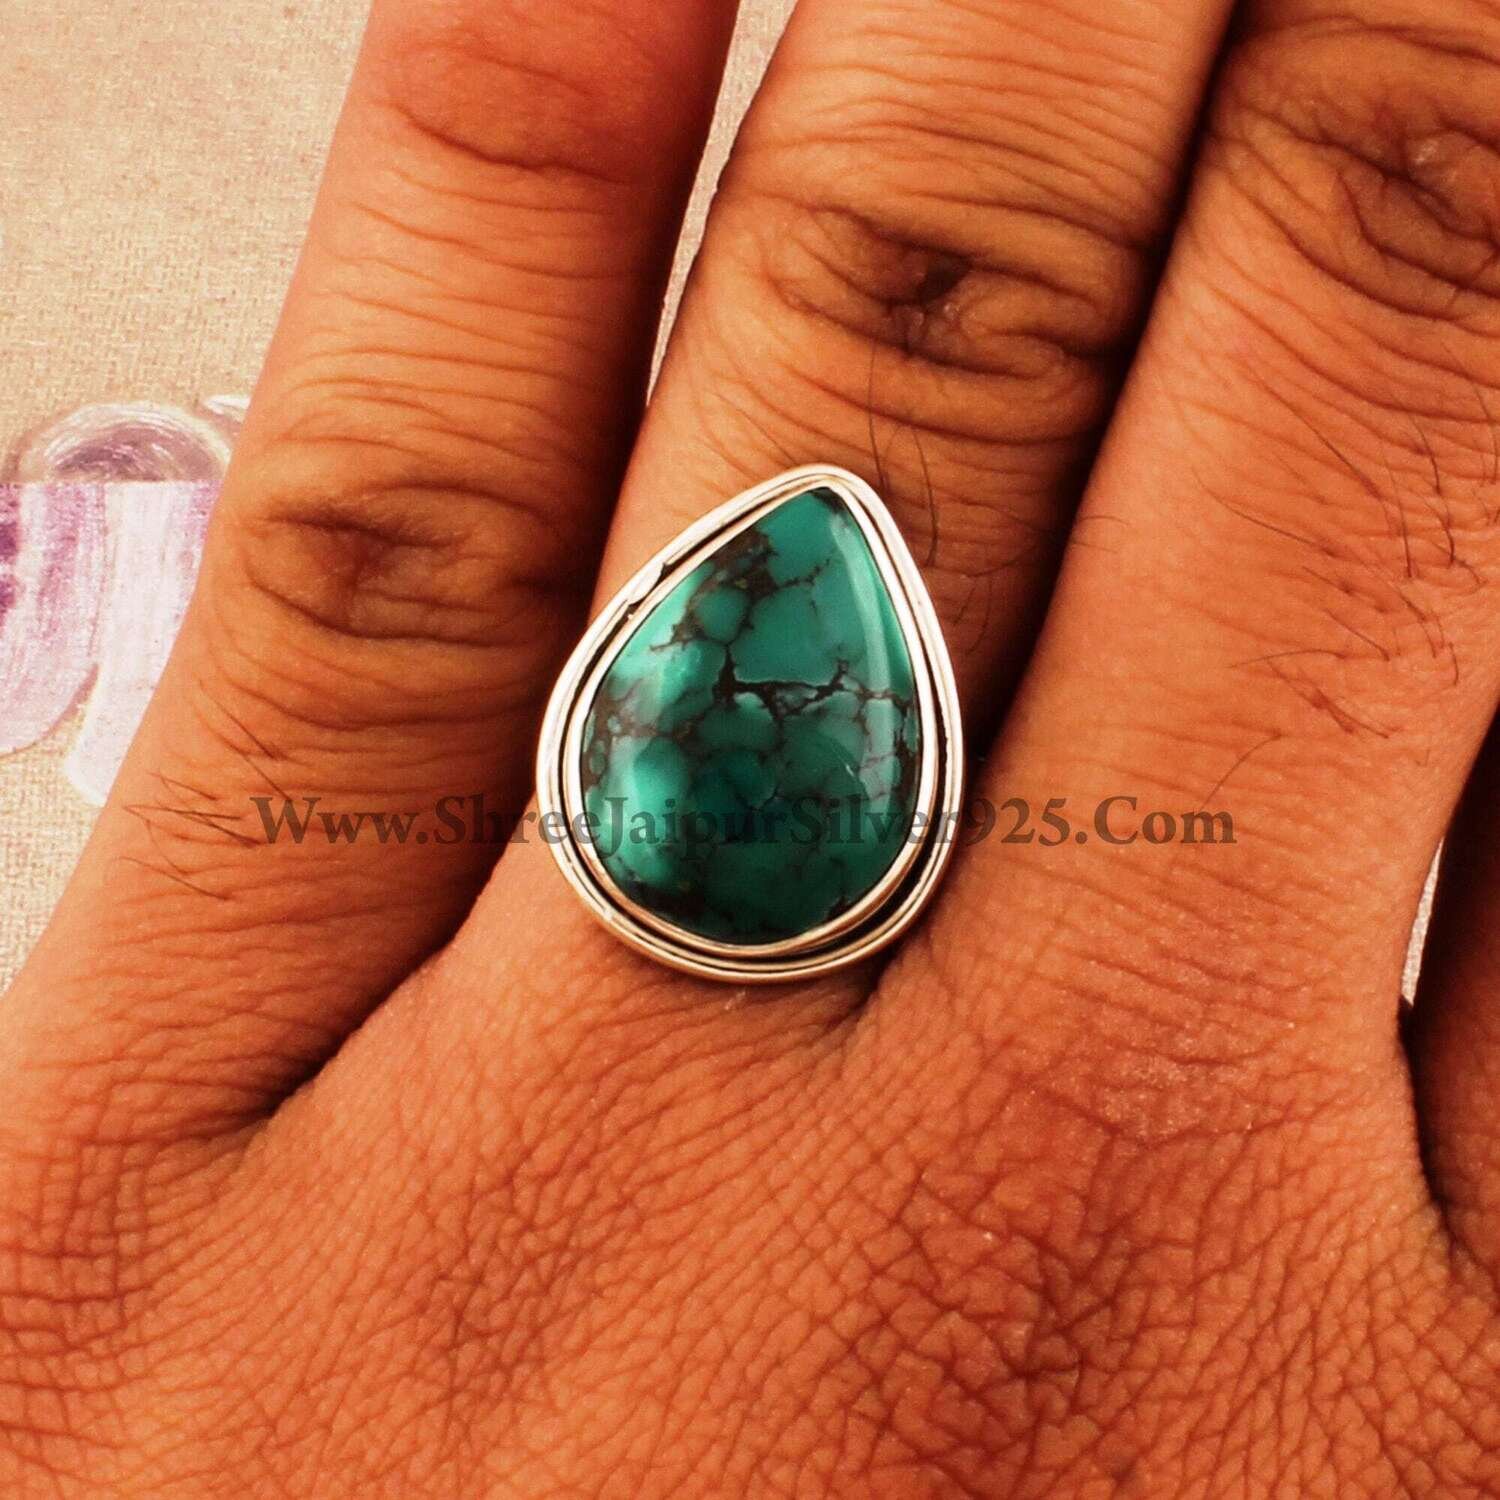 Tibetan Turquoise Solid 925 Sterling Silver Pear Gemstone Ring For Women, Boho Handmade Stone Silver Ring For Wedding Anniversary Gift idea